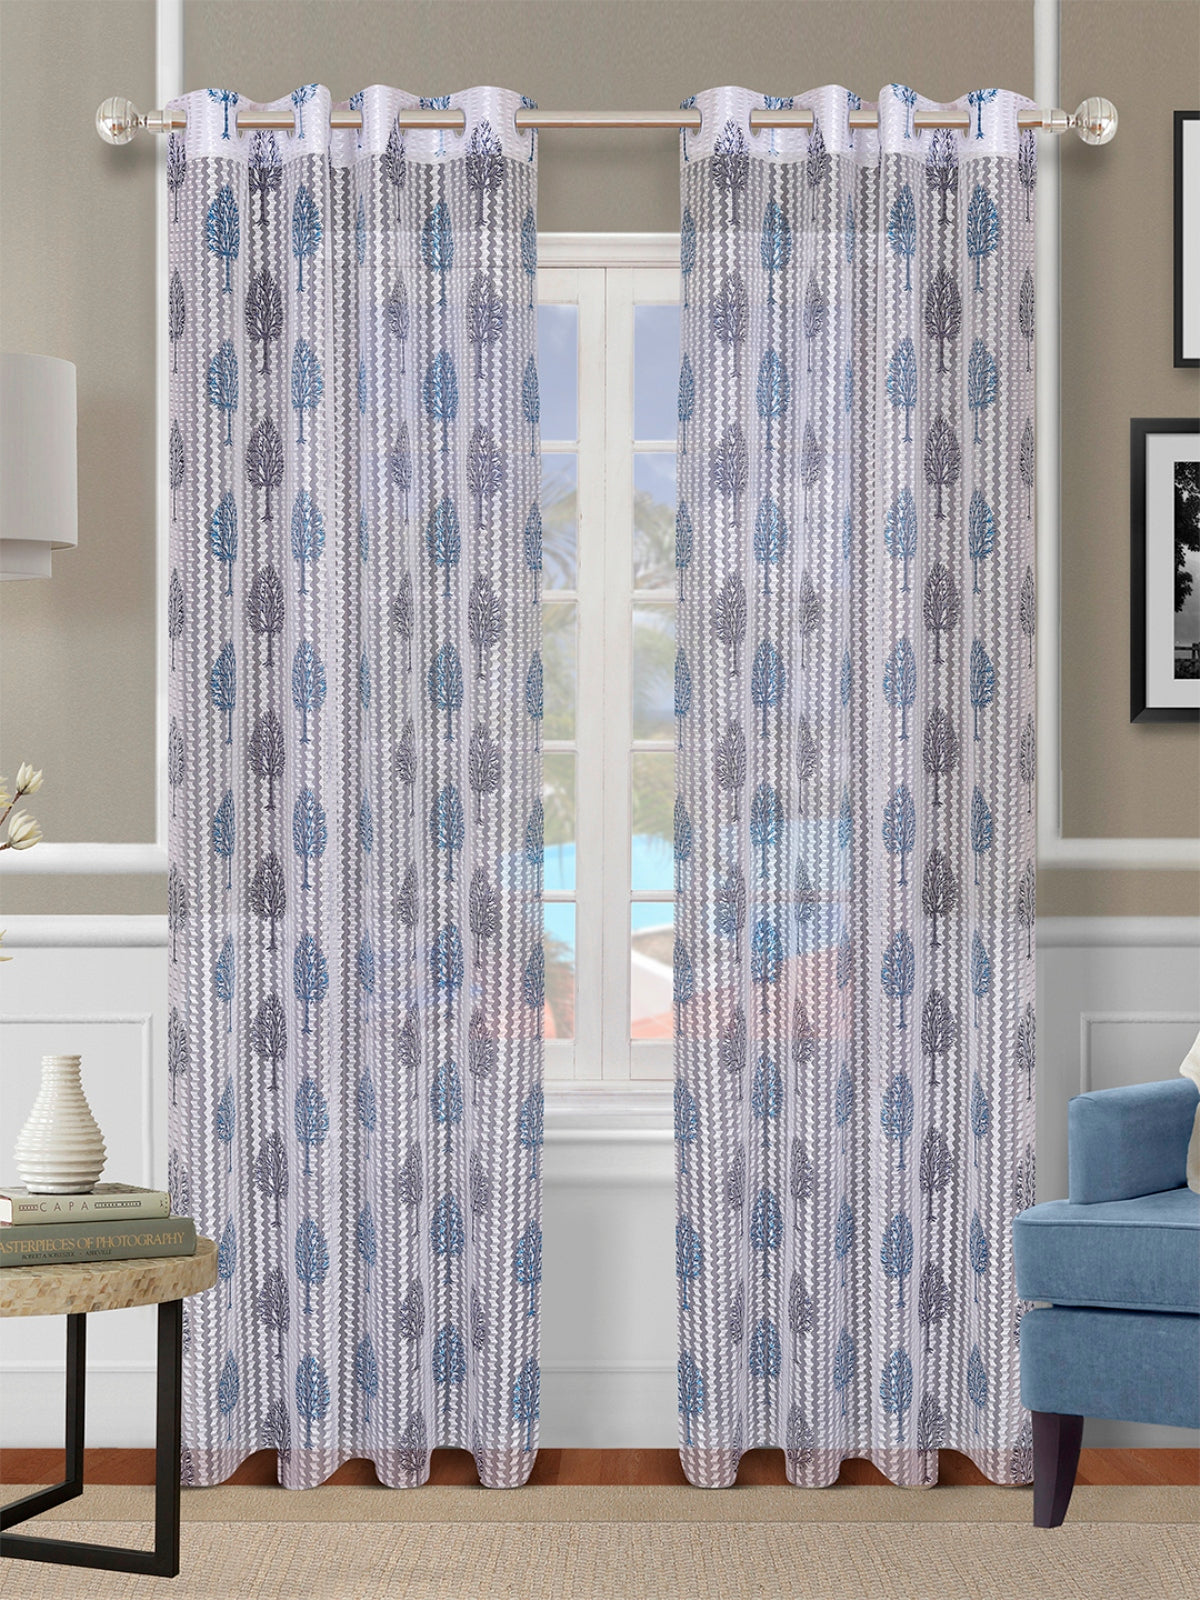 Romee Blue & Off White Floral Patterned Set of 2 Door Curtains